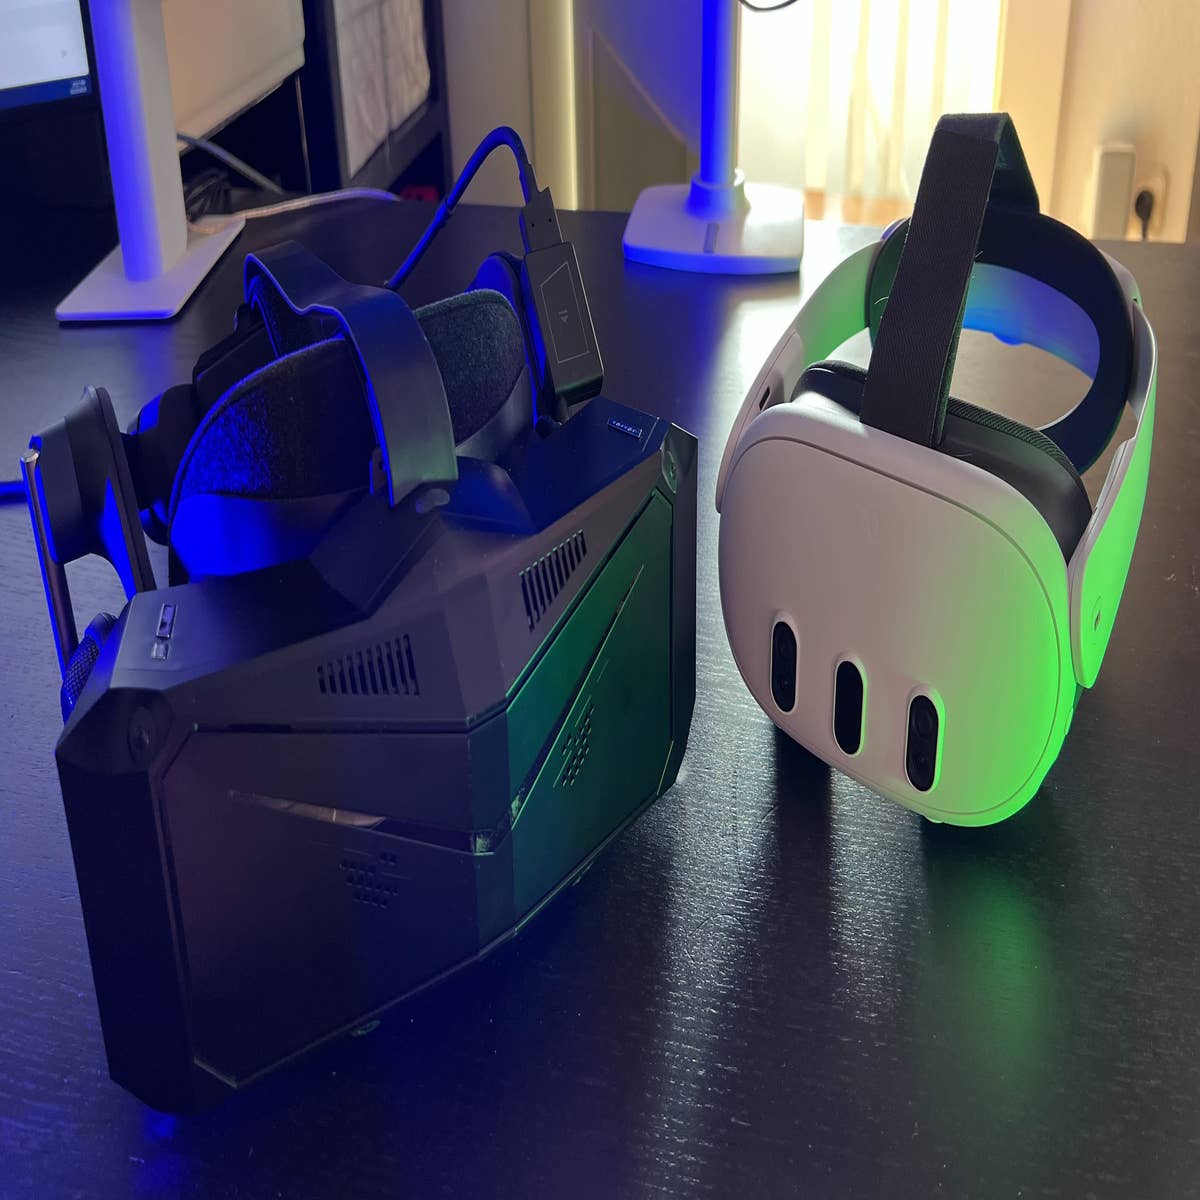 PIMAX CRYSTAL HANDS-ON IMPRESSIONS - This High-End VR Headset Has SOOO MUCH  Potential, BUT 